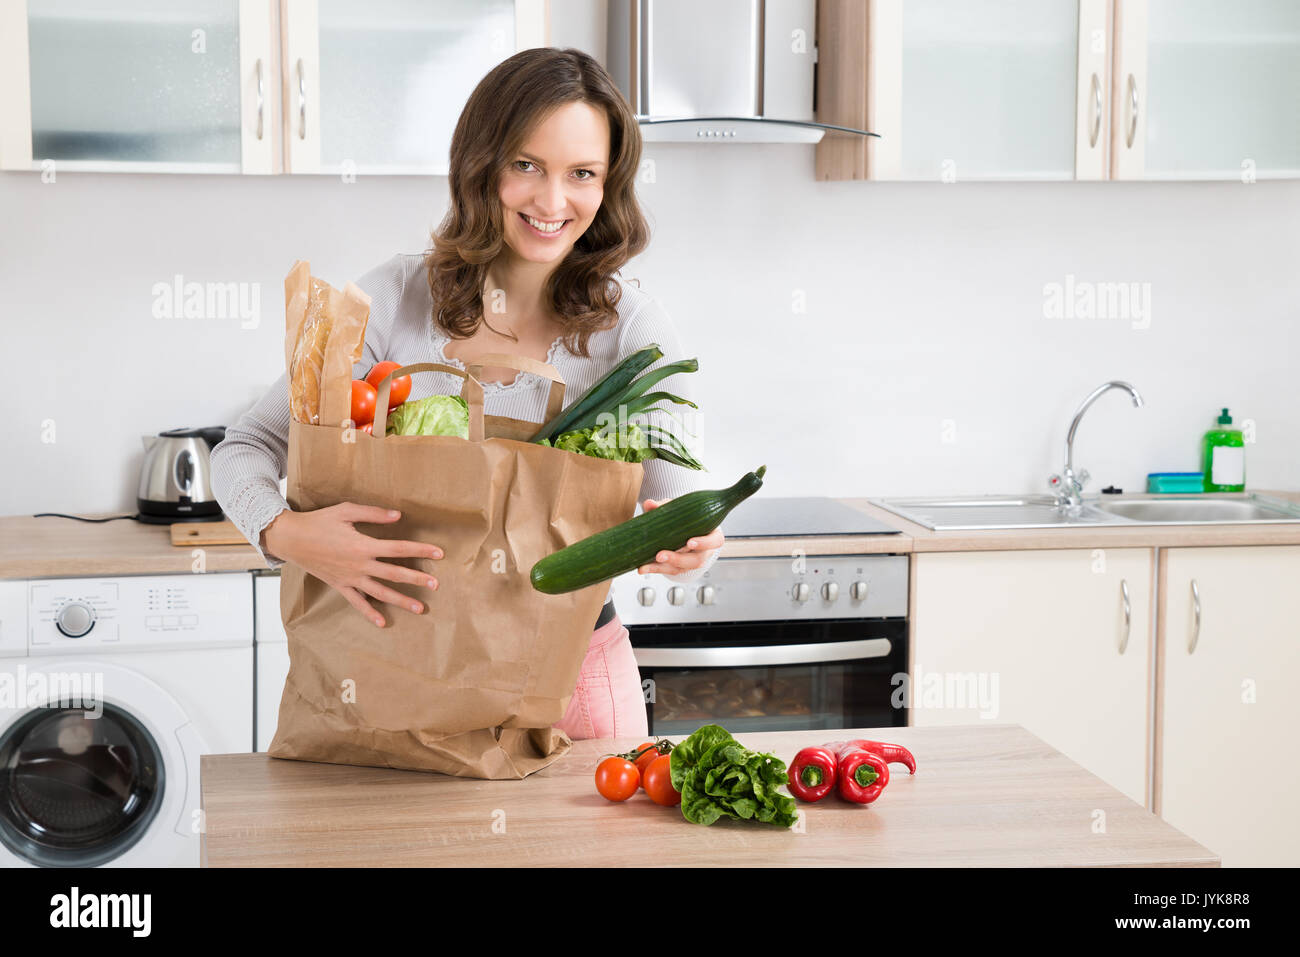 Happy Woman Sorting After Purchasing Vegetables In Kitchen Stock Photo